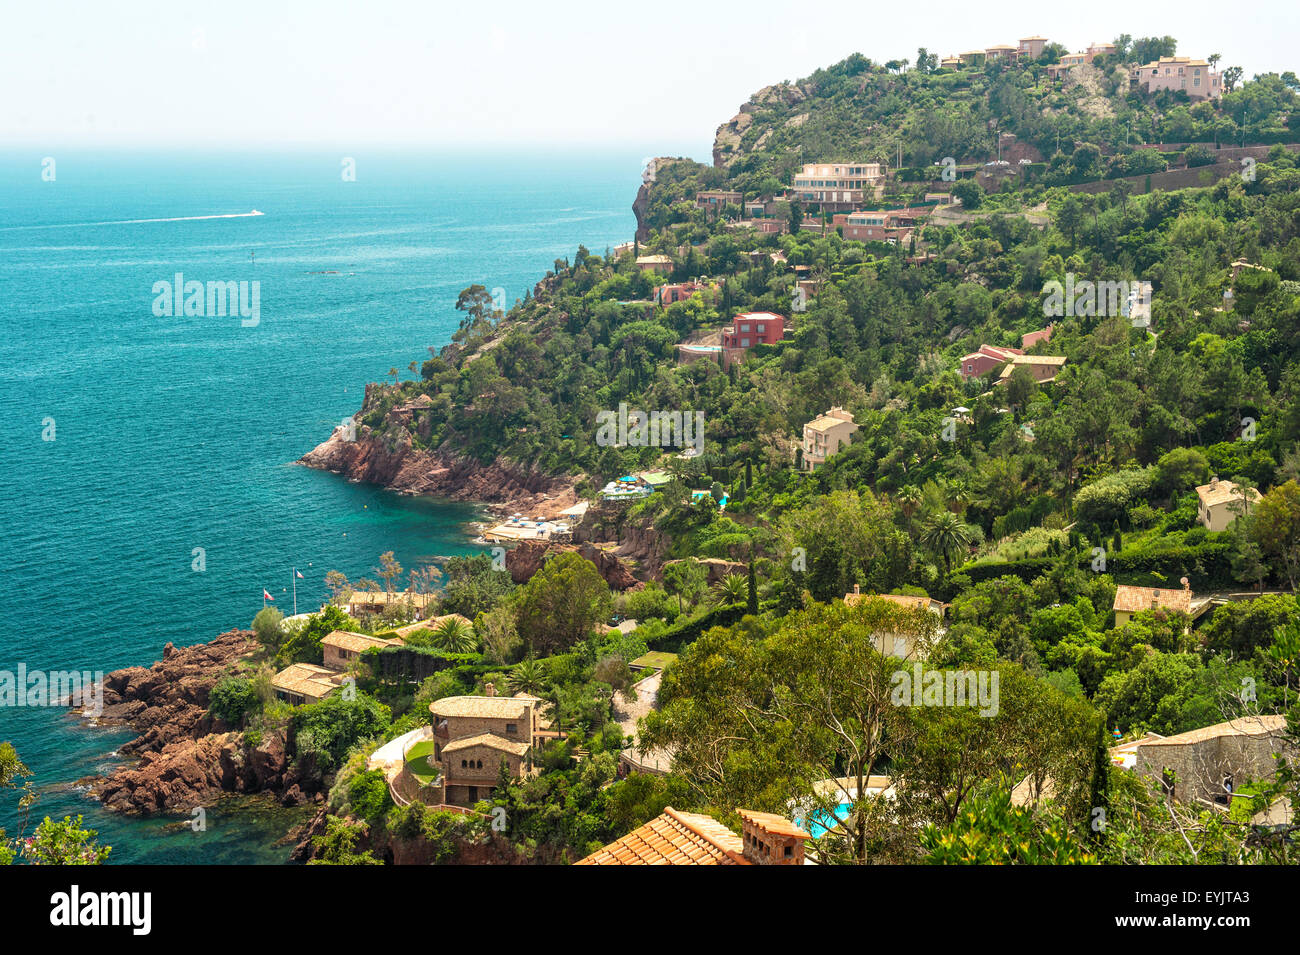 Beautiful mediterranean landscape, view of village and coastline, french riviera, France, near Nice and Monaco Stock Photo